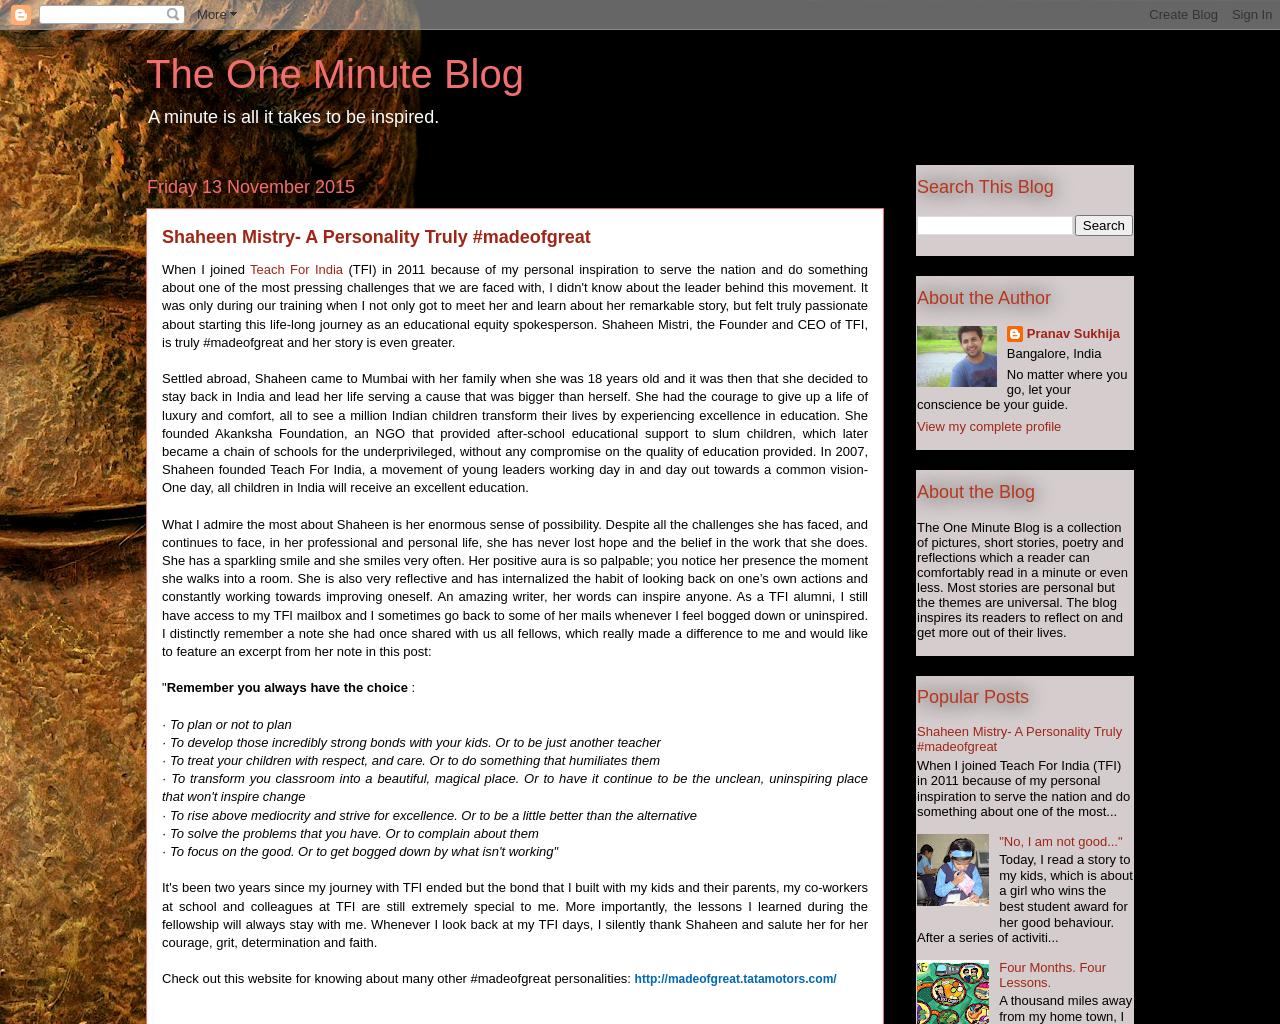 The One Minute Blog